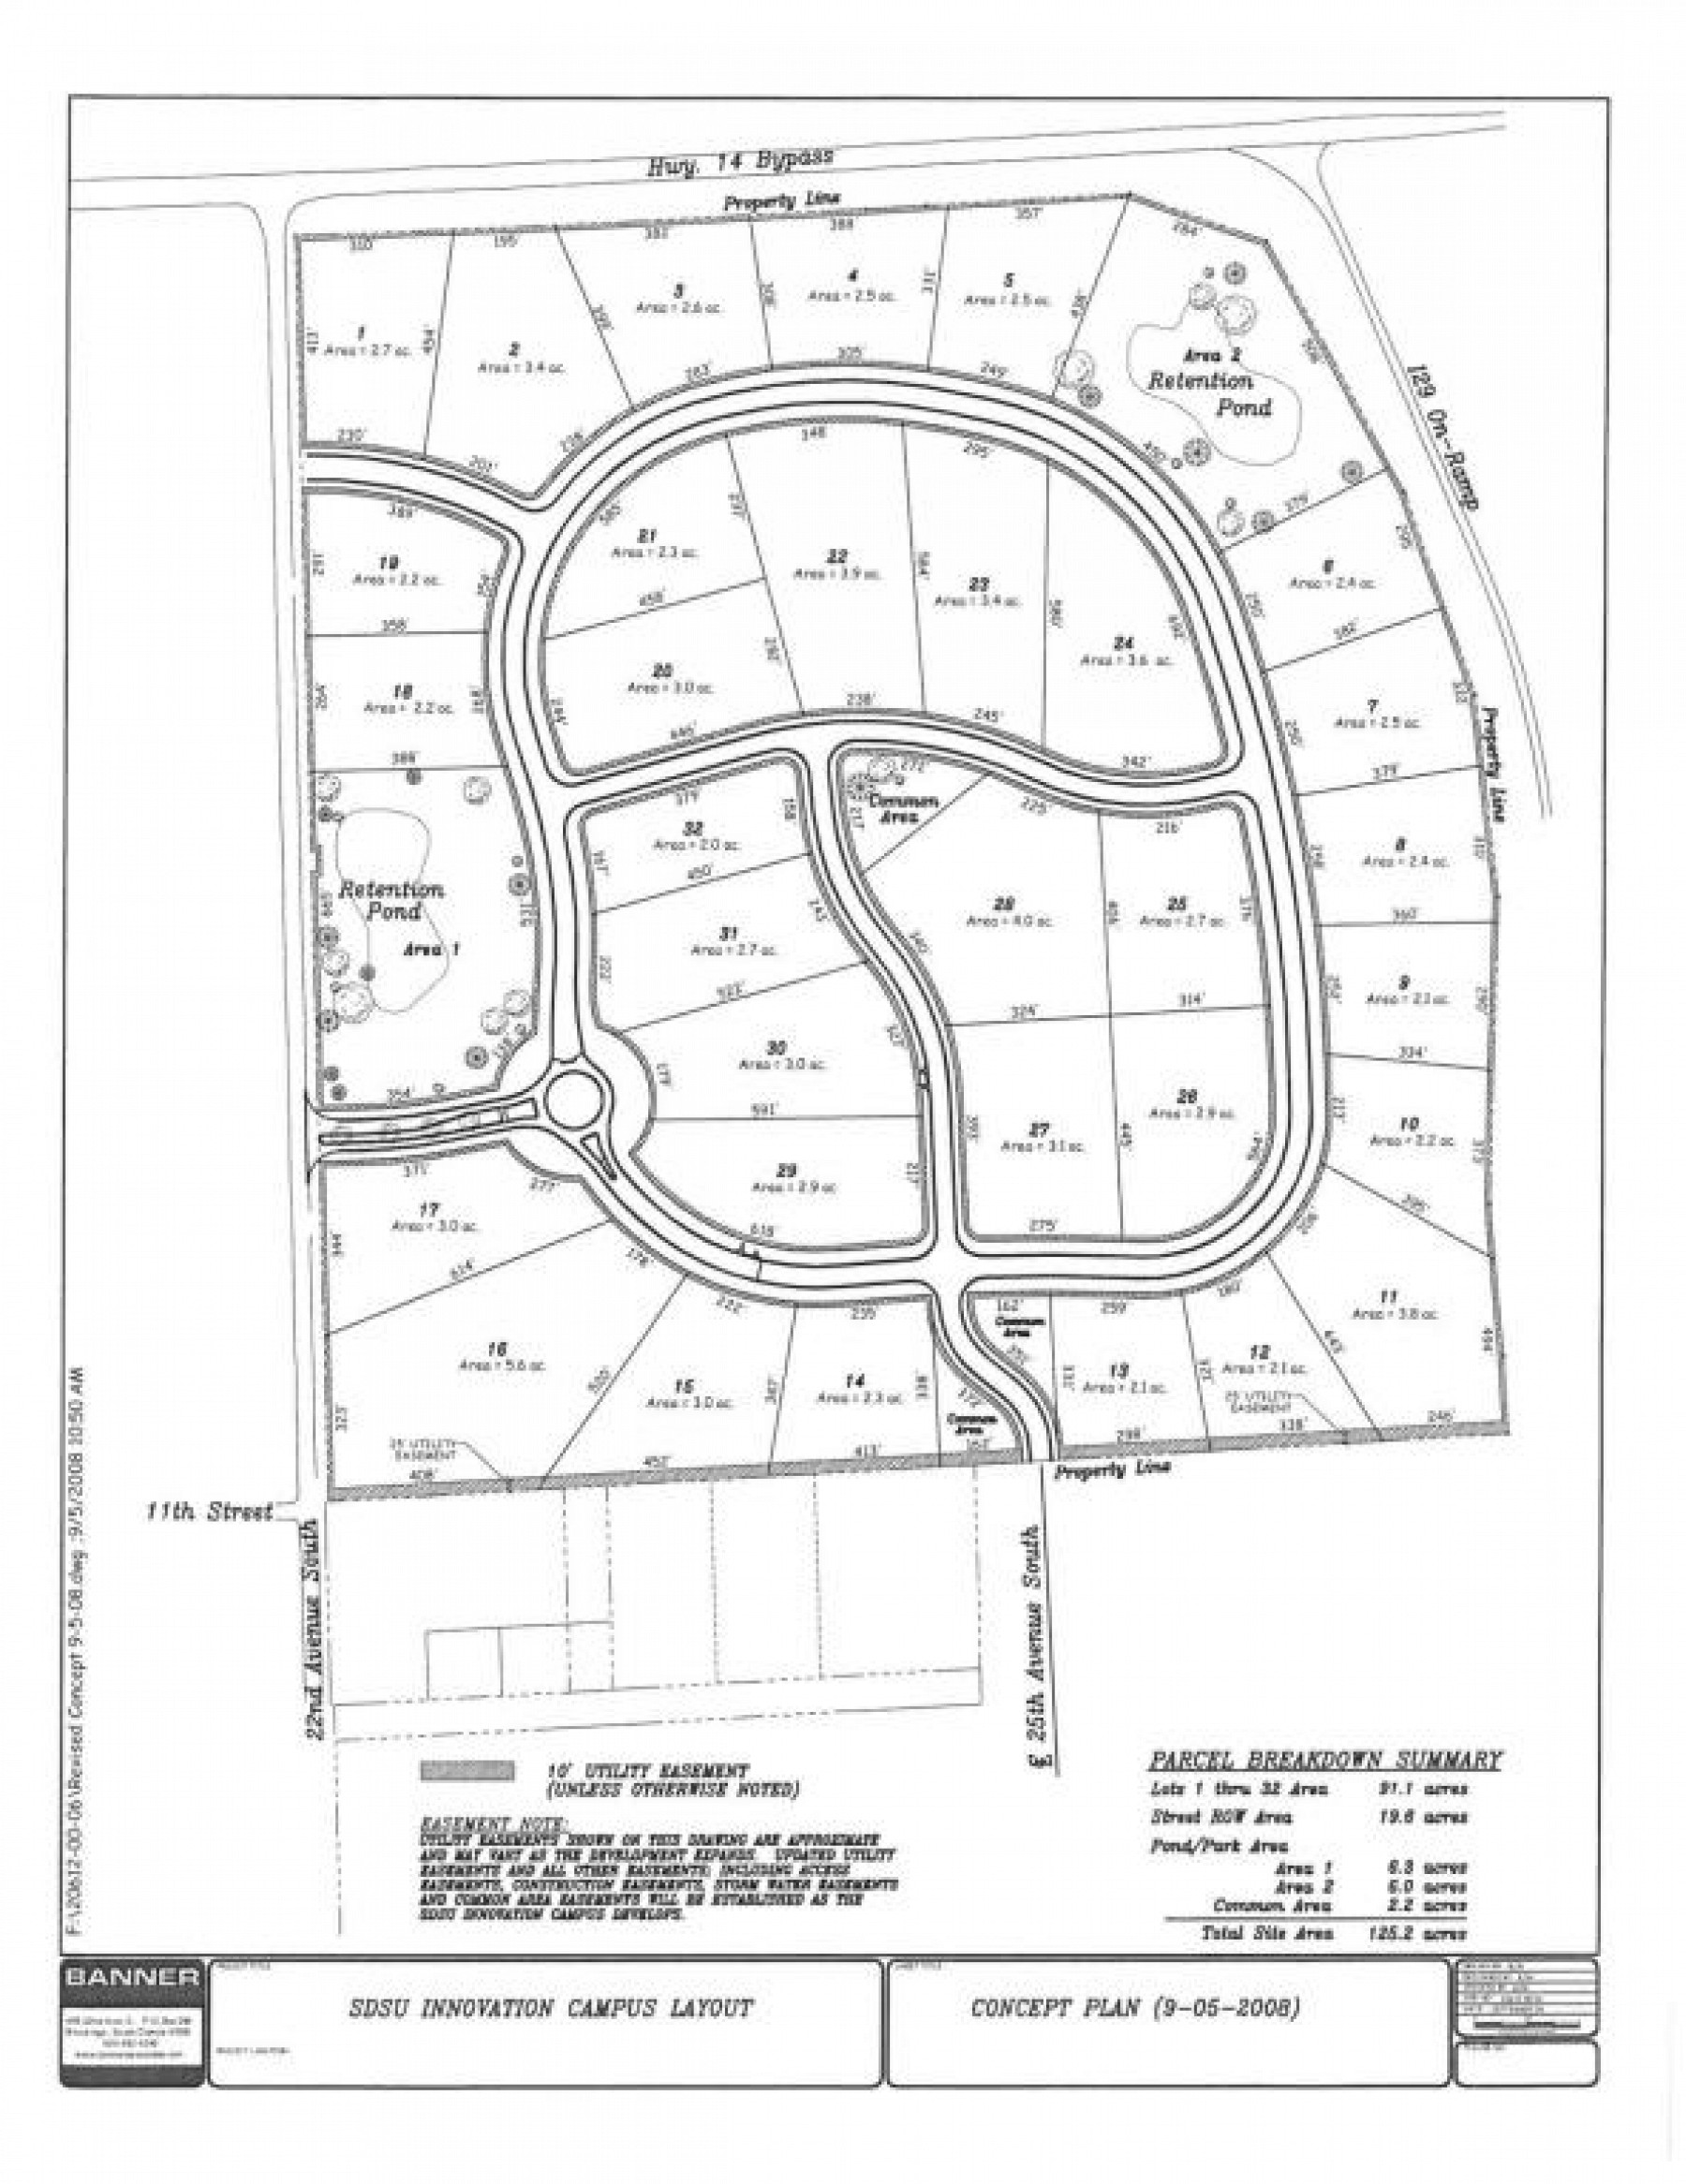 Lot 11 Innovation Campus, Brookings, SD 57006